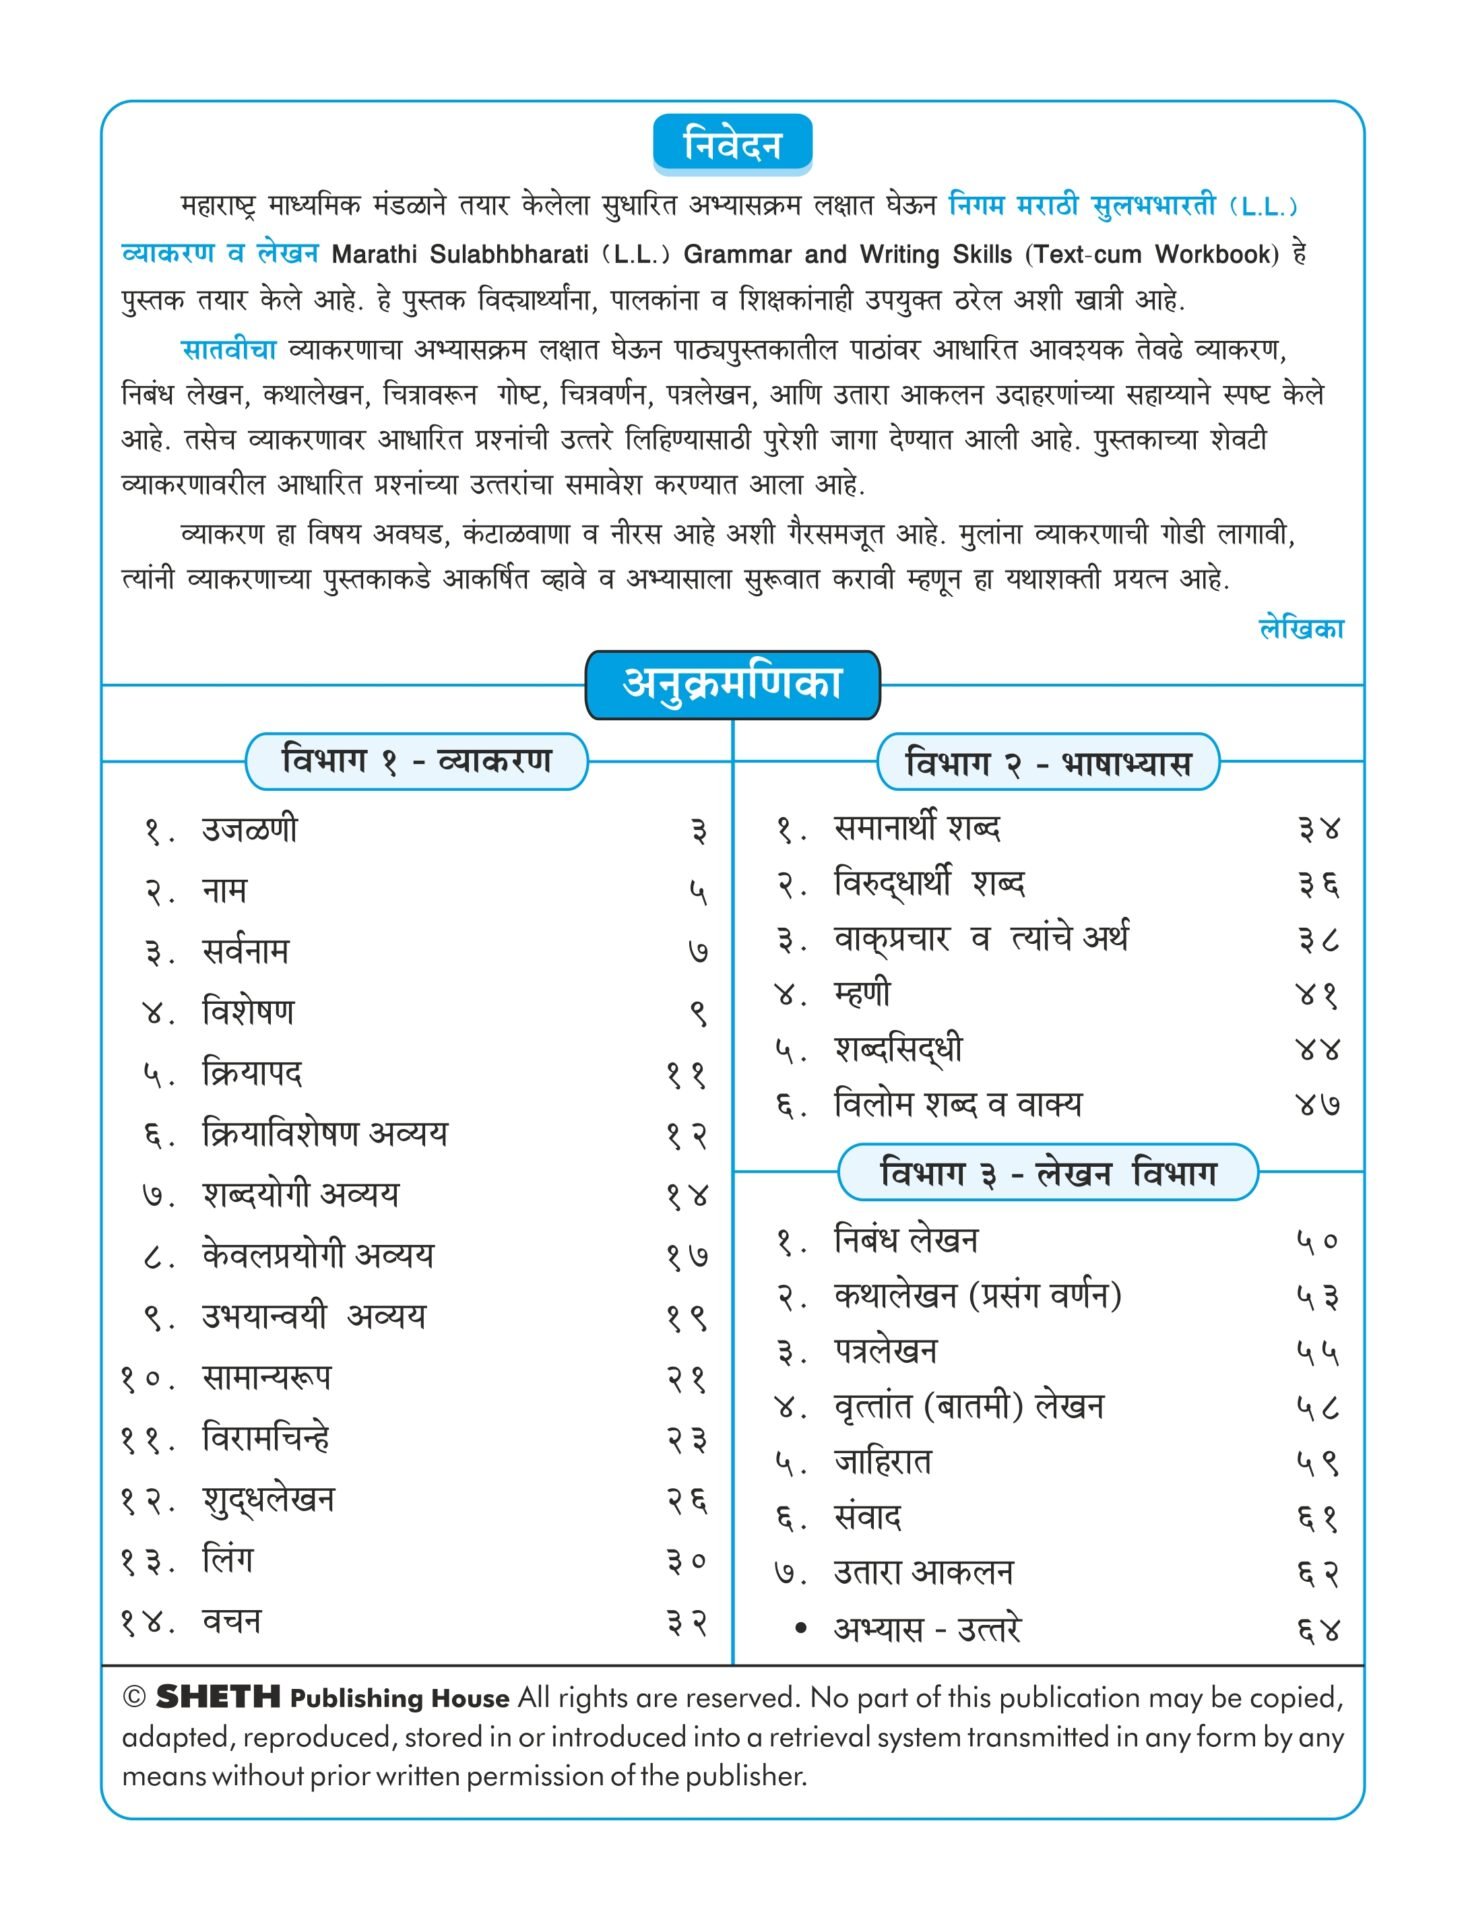 marathi-grammar-book-for-class-7-shethbooks-official-buy-page-of-sheth-publishing-house